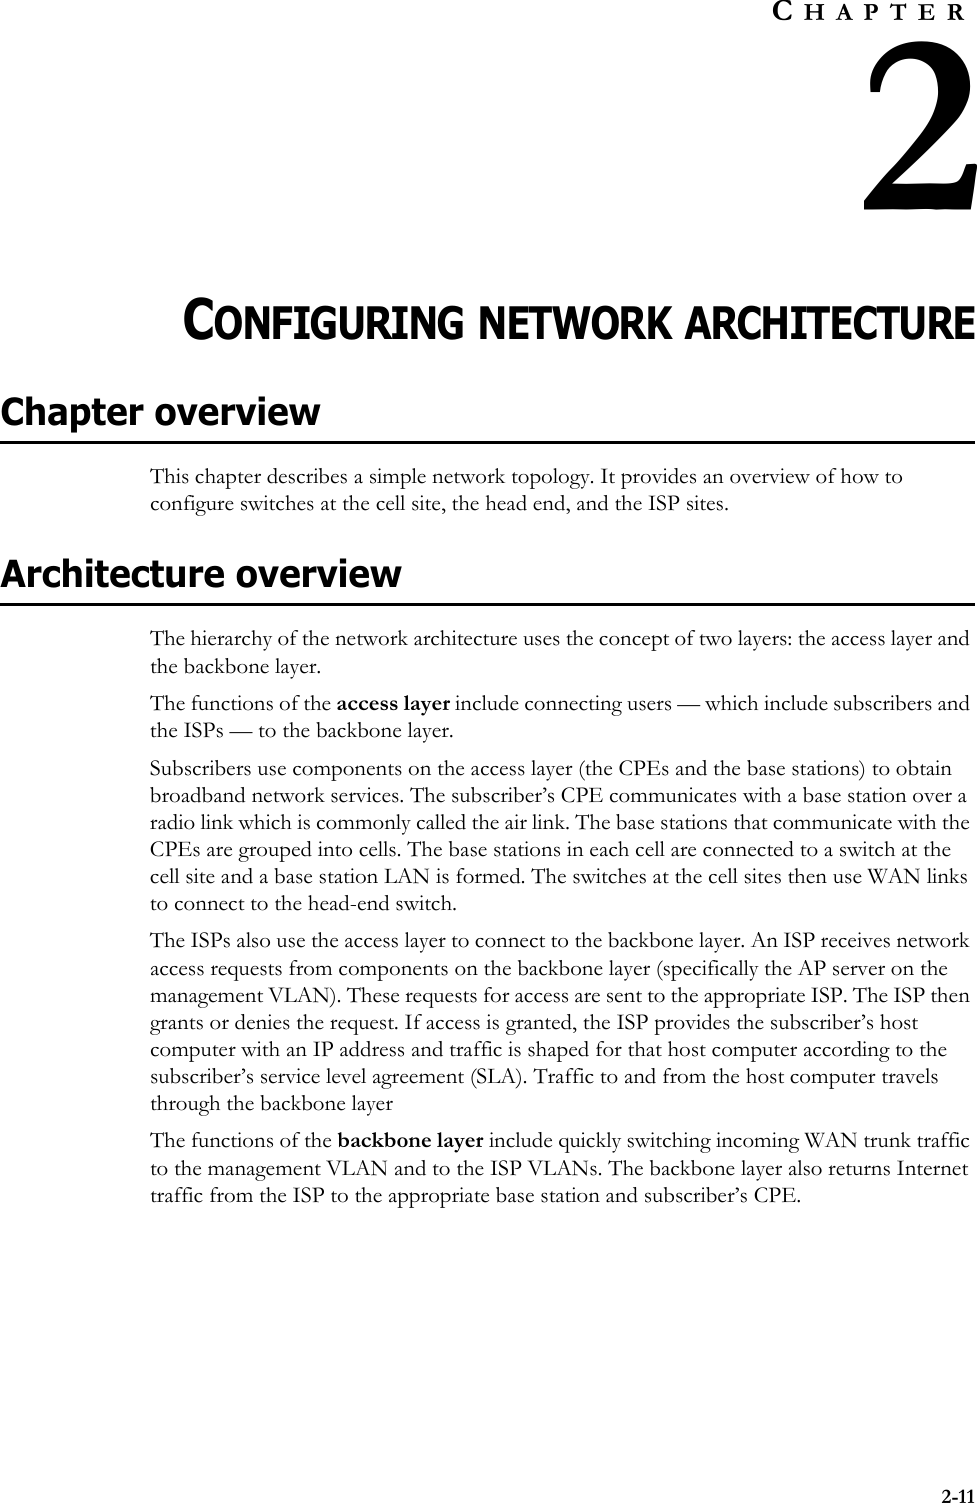 2-11CHAPTER2CONFIGURING NETWORK ARCHITECTUREChapter overviewThis chapter describes a simple network topology. It provides an overview of how to configure switches at the cell site, the head end, and the ISP sites. Architecture overviewThe hierarchy of the network architecture uses the concept of two layers: the access layer and the backbone layer. The functions of the access layer include connecting users — which include subscribers and the ISPs — to the backbone layer. Subscribers use components on the access layer (the CPEs and the base stations) to obtain broadband network services. The subscriber’s CPE communicates with a base station over a radio link which is commonly called the air link. The base stations that communicate with the CPEs are grouped into cells. The base stations in each cell are connected to a switch at the cell site and a base station LAN is formed. The switches at the cell sites then use WAN links to connect to the head-end switch. The ISPs also use the access layer to connect to the backbone layer. An ISP receives network access requests from components on the backbone layer (specifically the AP server on the management VLAN). These requests for access are sent to the appropriate ISP. The ISP then grants or denies the request. If access is granted, the ISP provides the subscriber’s host computer with an IP address and traffic is shaped for that host computer according to the subscriber’s service level agreement (SLA). Traffic to and from the host computer travels through the backbone layer The functions of the backbone layer include quickly switching incoming WAN trunk traffic to the management VLAN and to the ISP VLANs. The backbone layer also returns Internet traffic from the ISP to the appropriate base station and subscriber’s CPE.